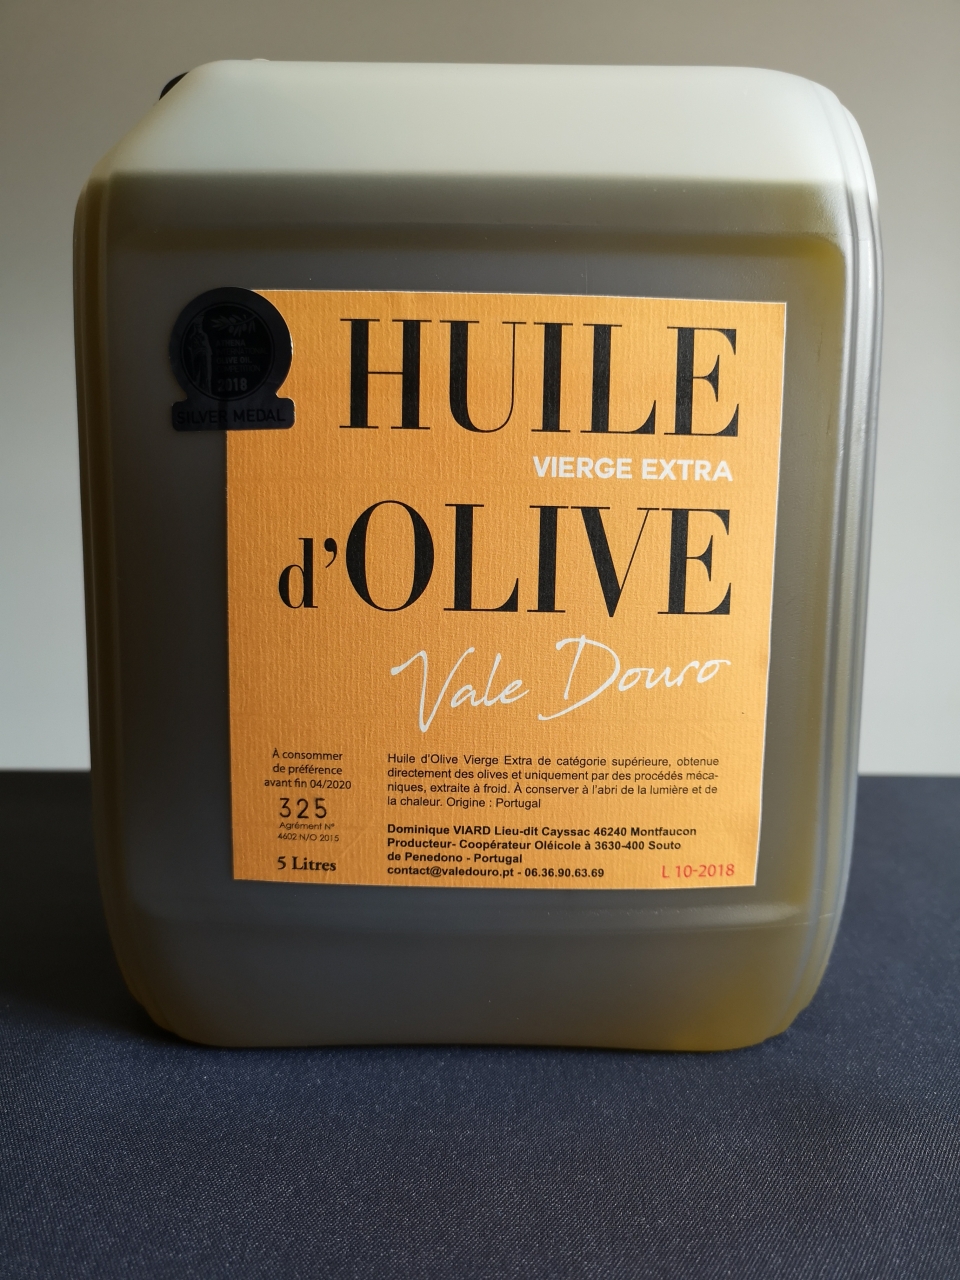 Huile d'olive vierge extra - bidon 5 - 2 formats - Vale Douro 